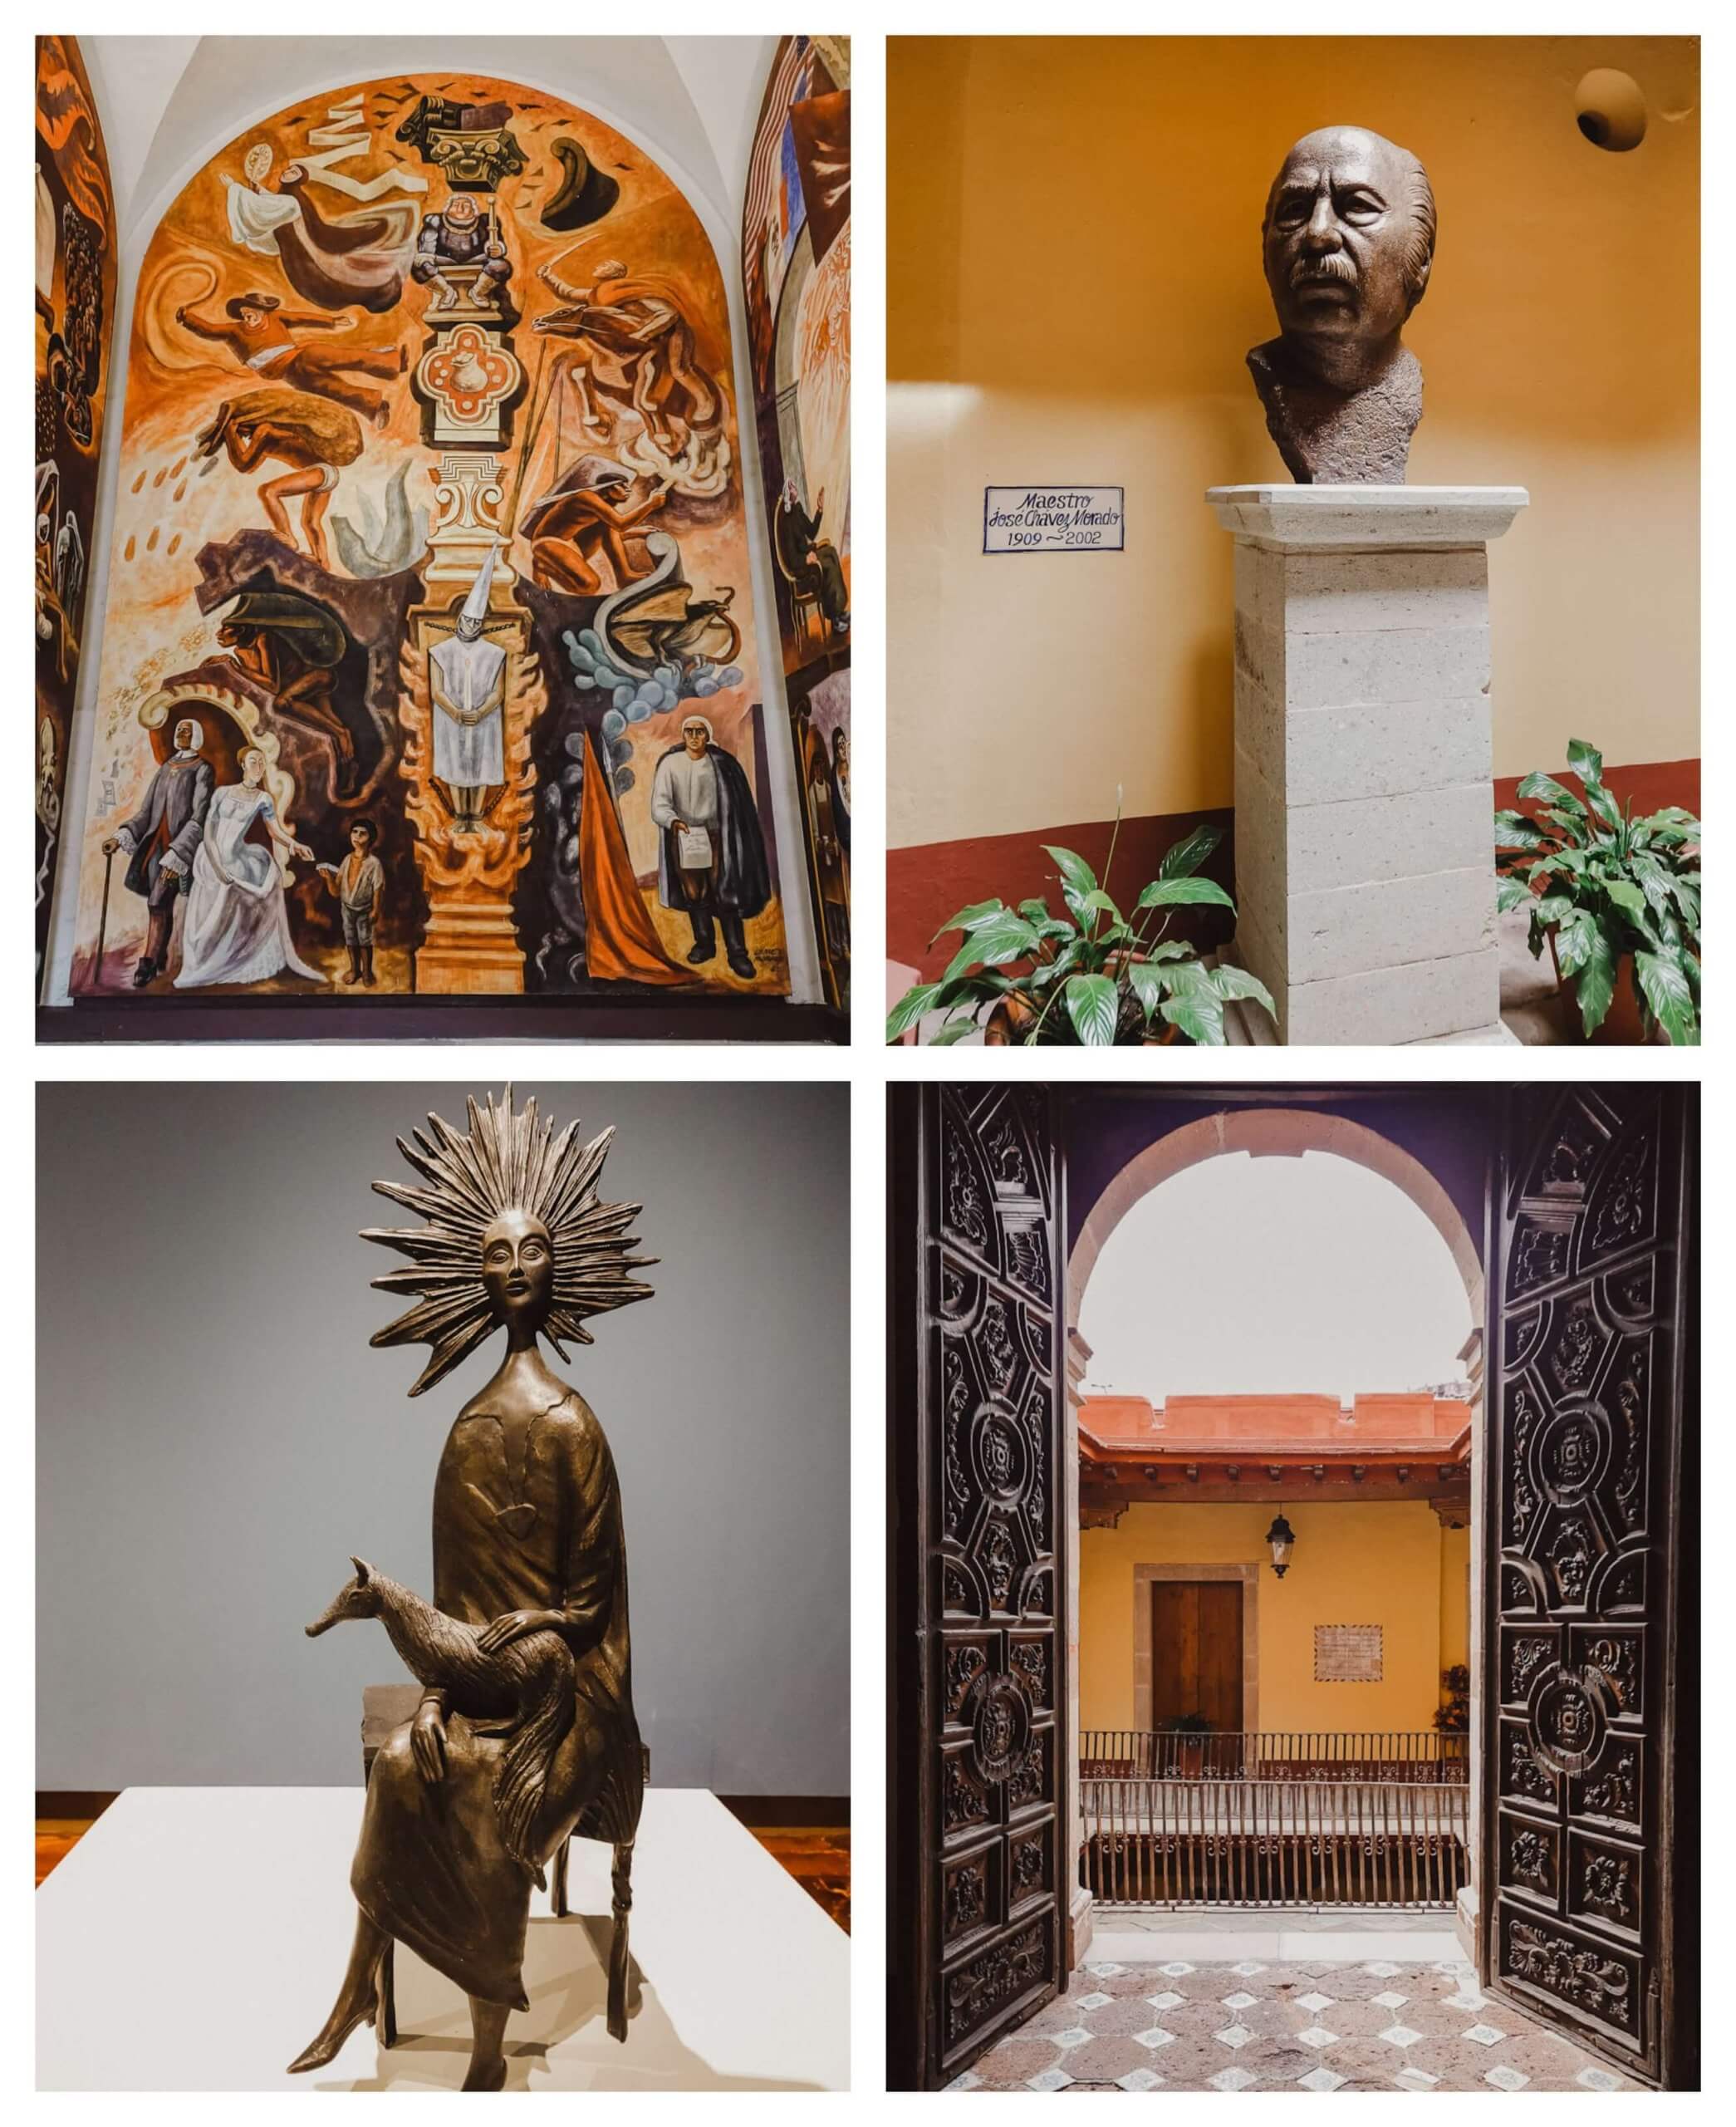 Museum of the People, Guanajuato